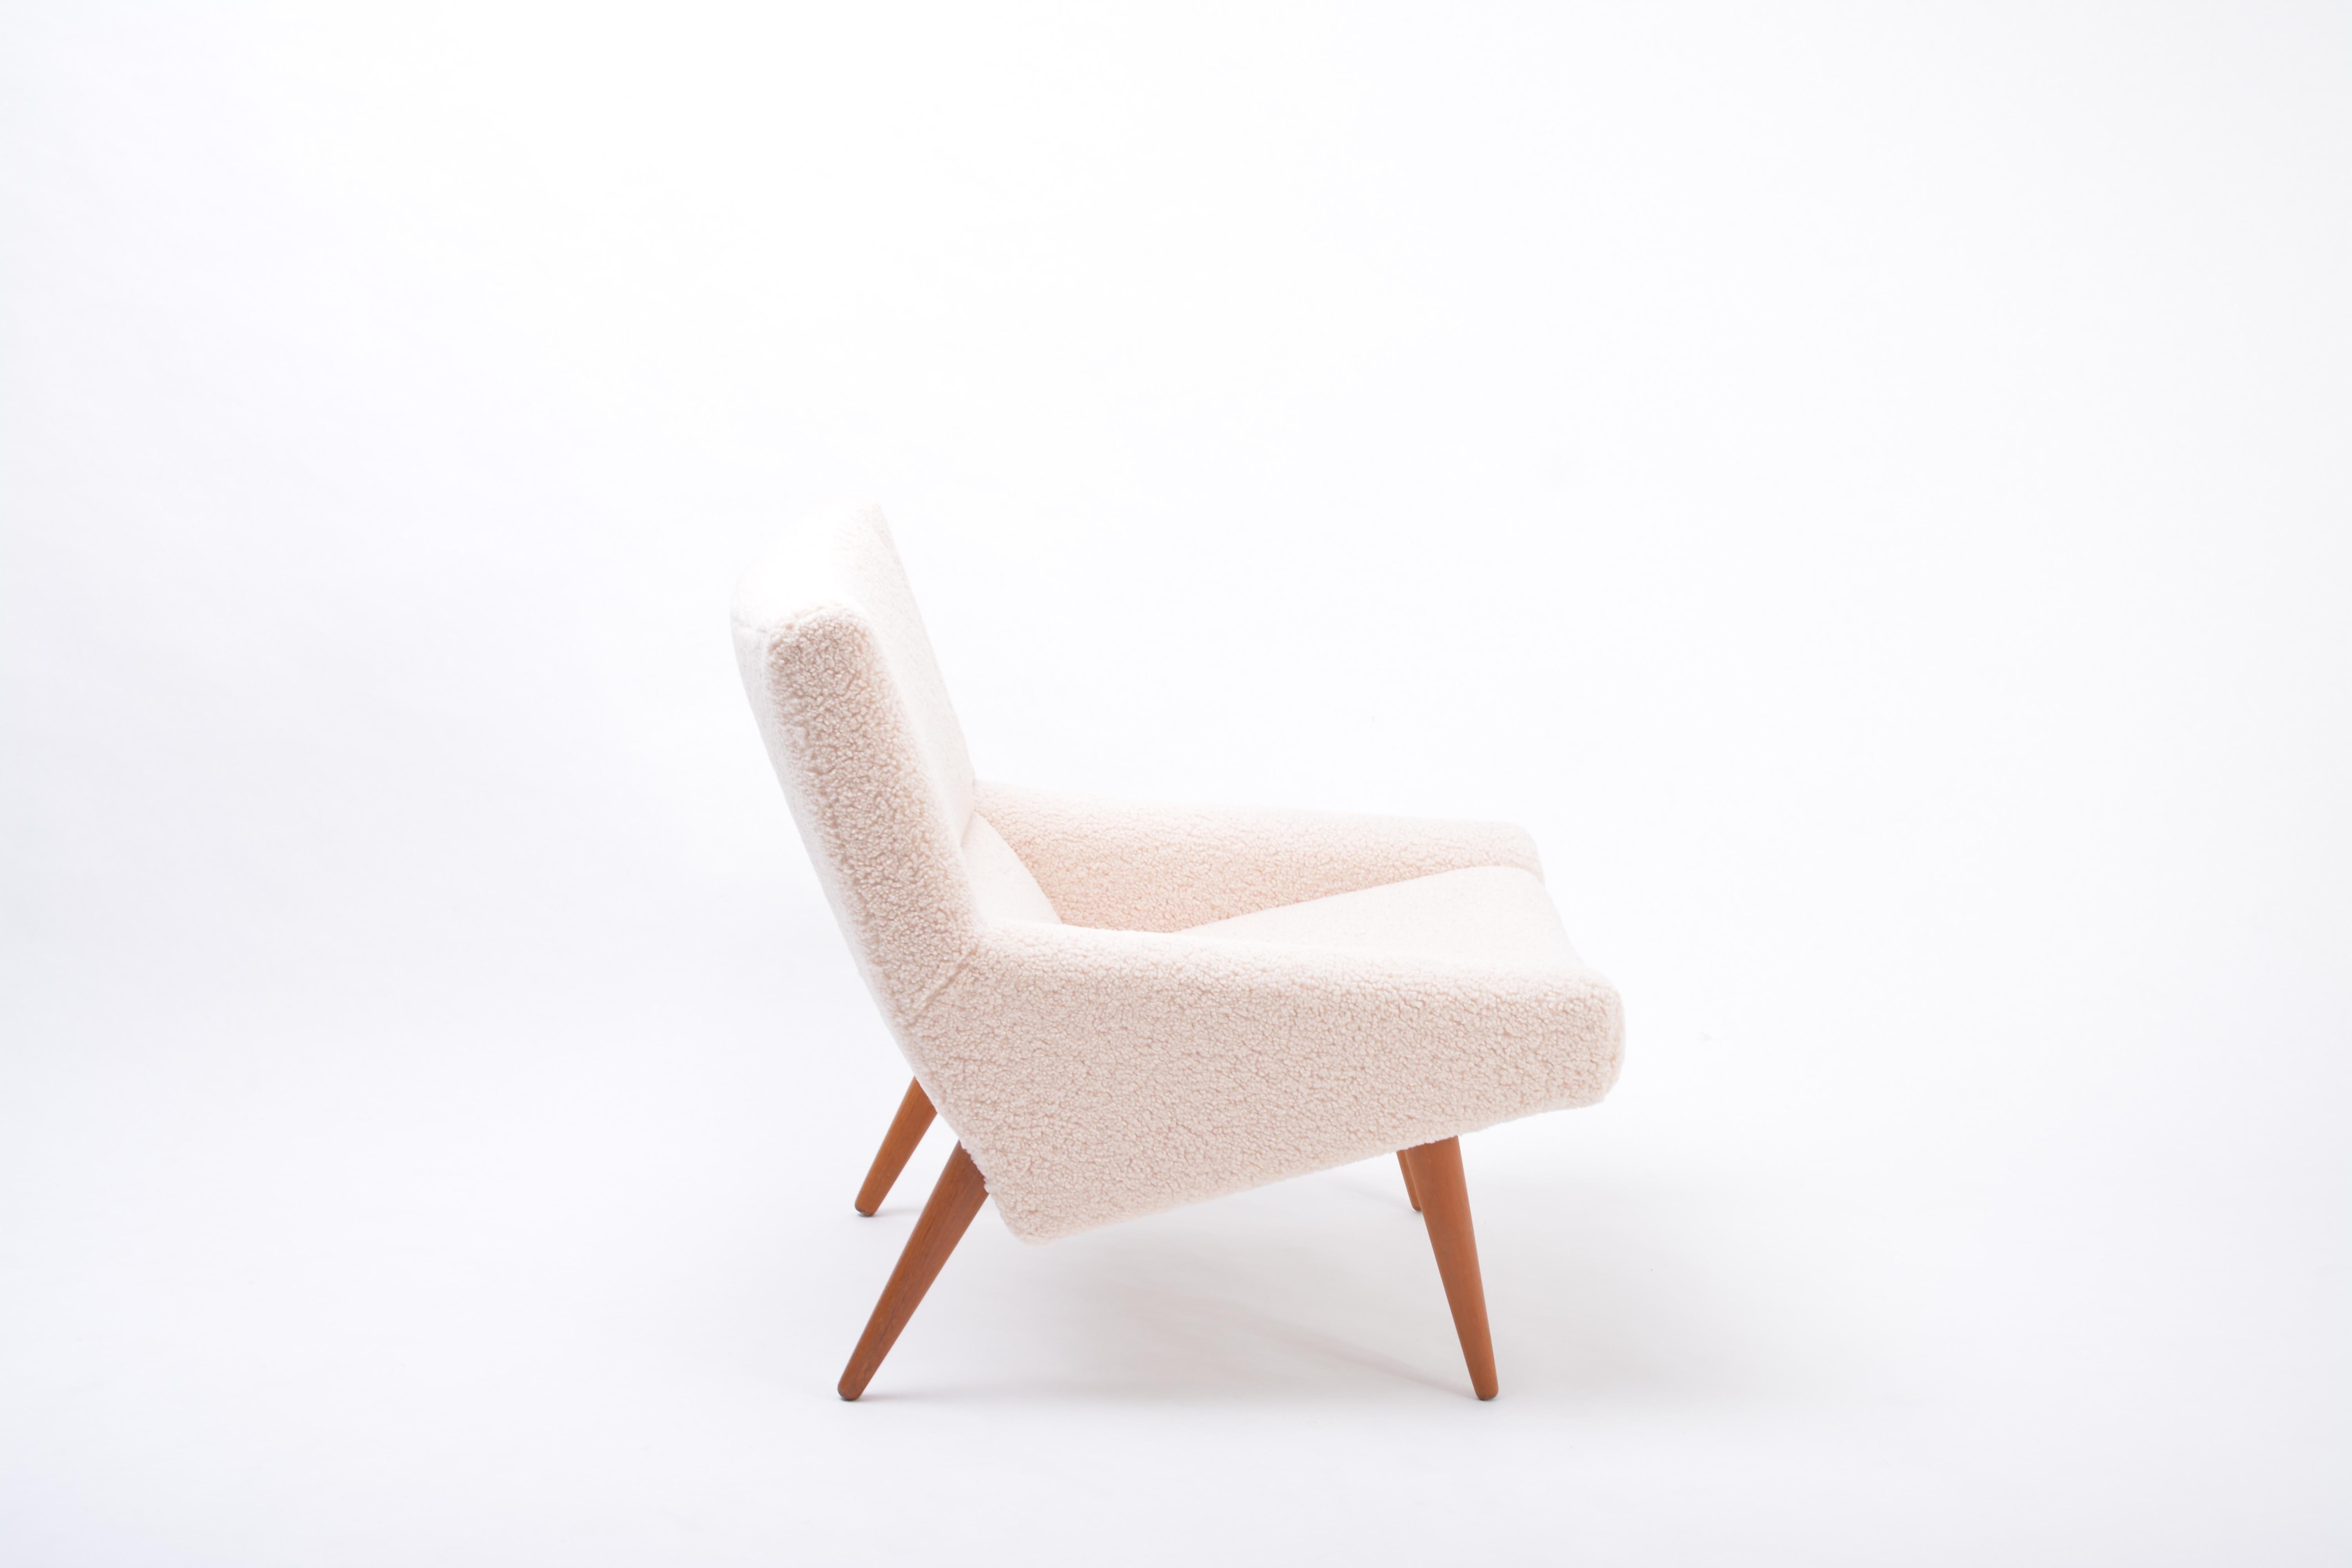 Danish Mid-Century Modern Model 50 chair by Illum Wikkelsø in teddy fur

This model 50 lounge chair was designed by Illum Wikkelsø and was produced by Søren Willadsen in Denmark in the 1960s. The chair has been reupholstered with a cream colored